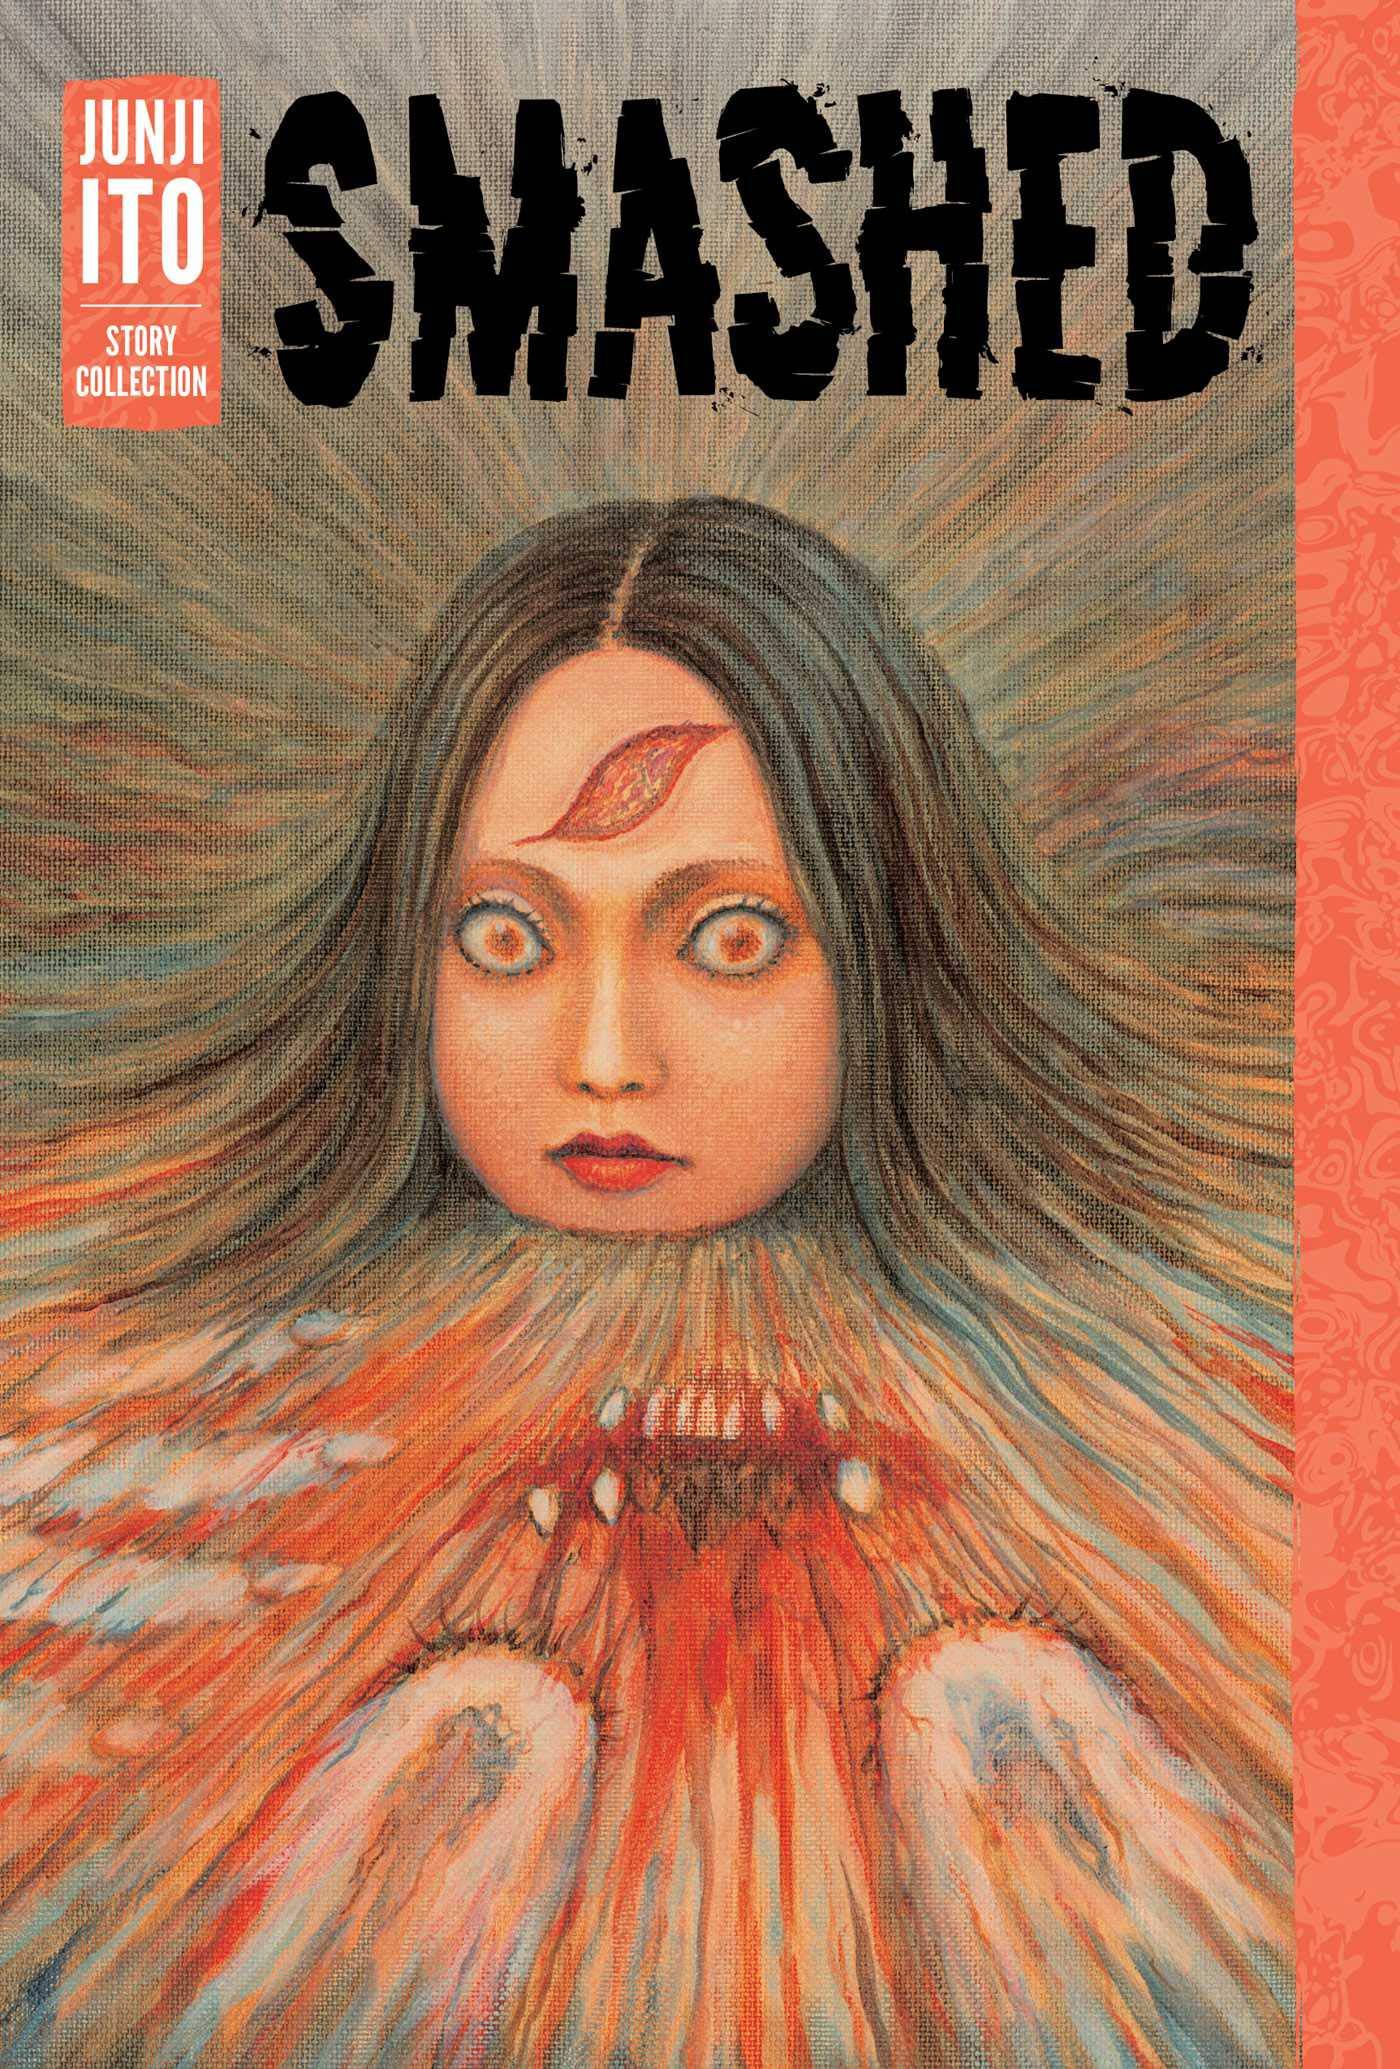 Junji Ito Story Collection Hardcover Volume 4 Smashed